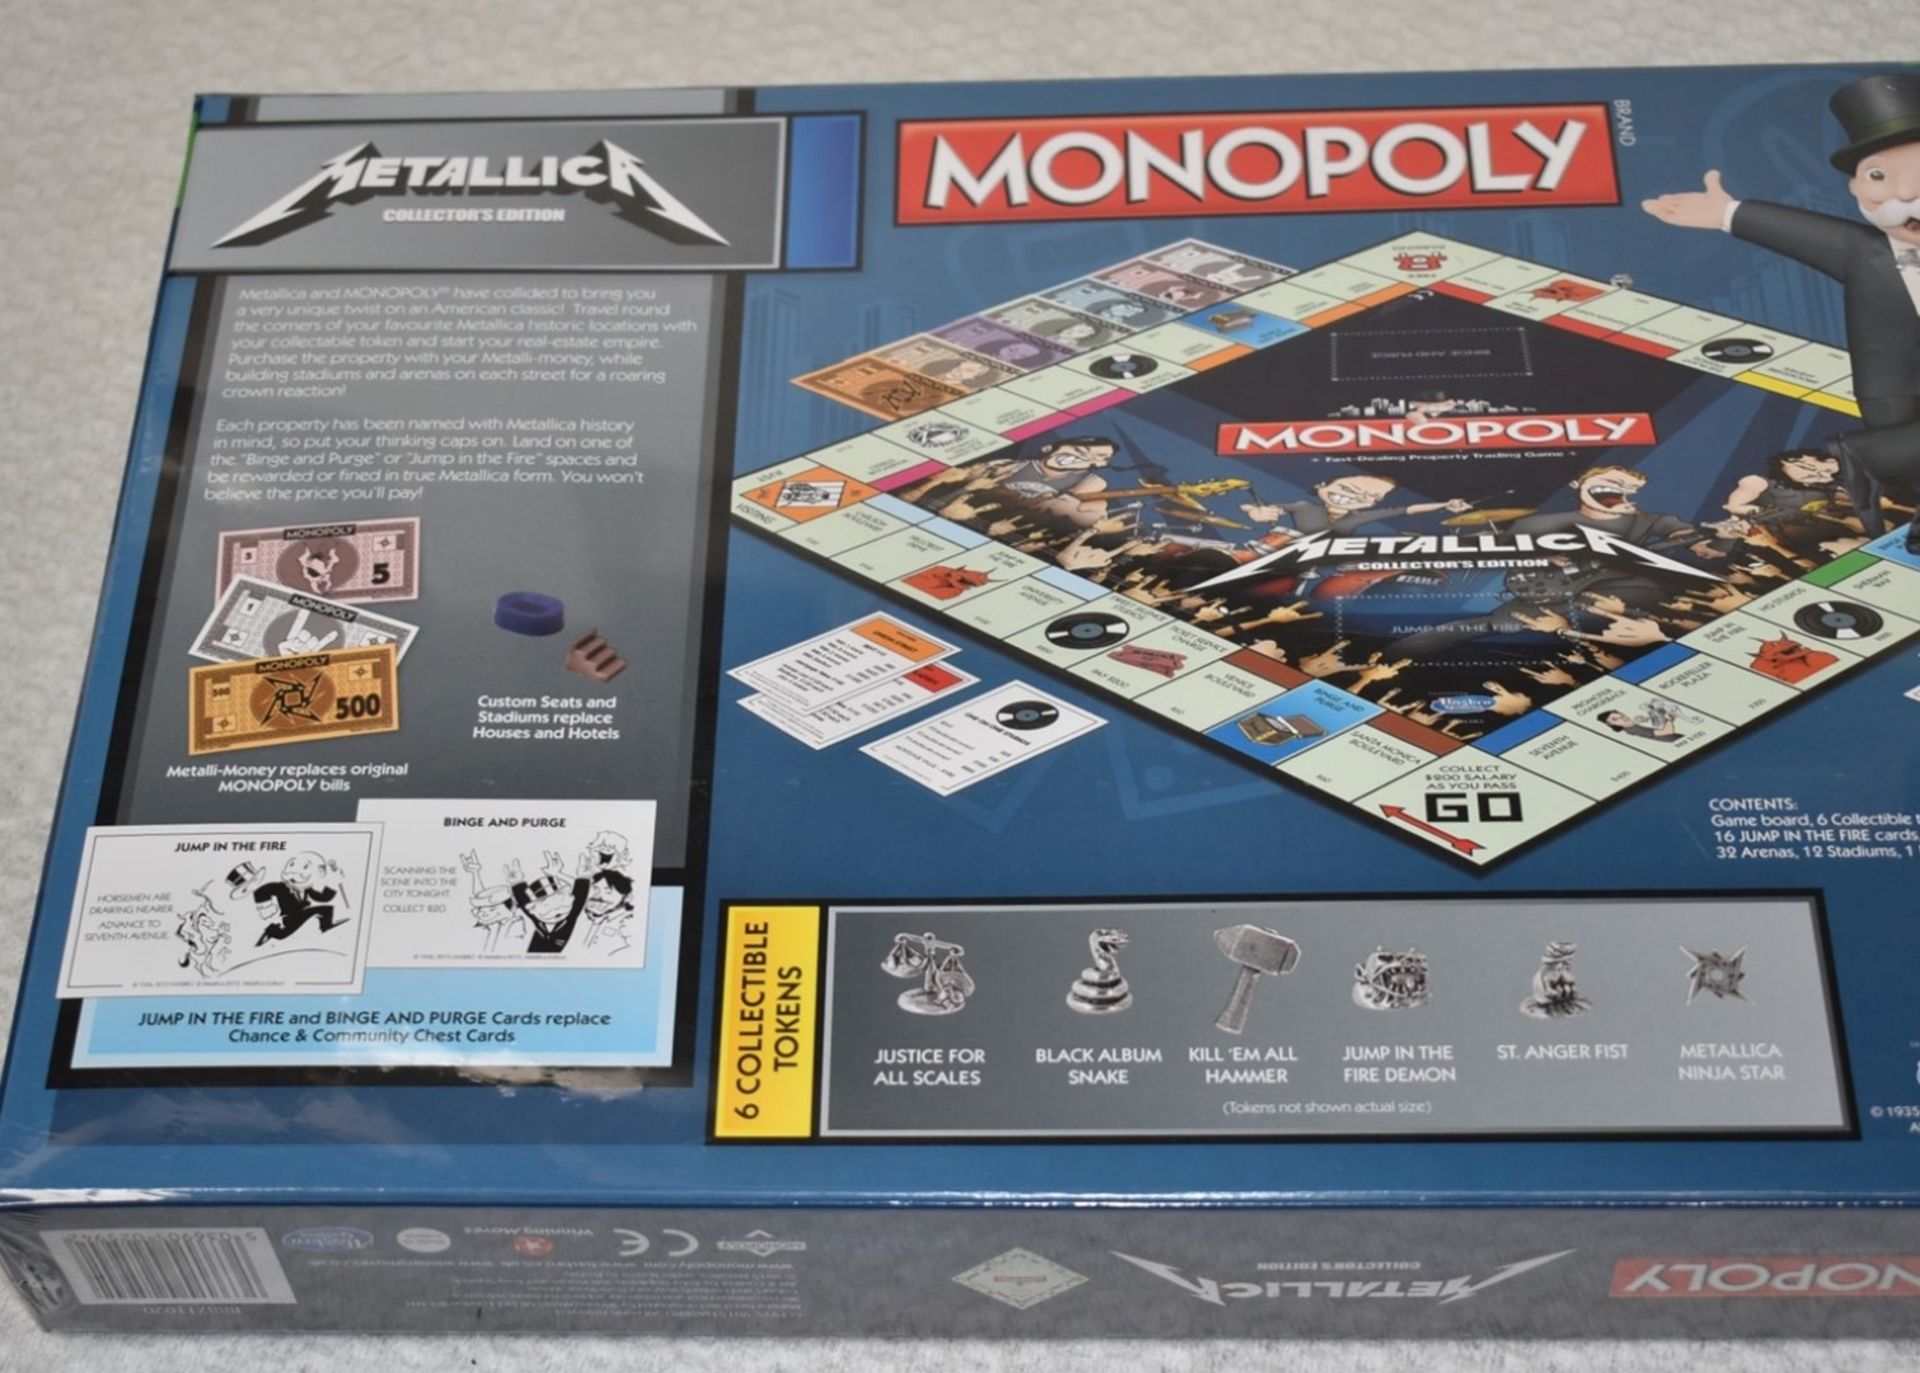 1 x Monopoly Board Game - METALLICA COLLECTORS EDITION - Officially Licensed Merchandise - New & - Image 5 of 5